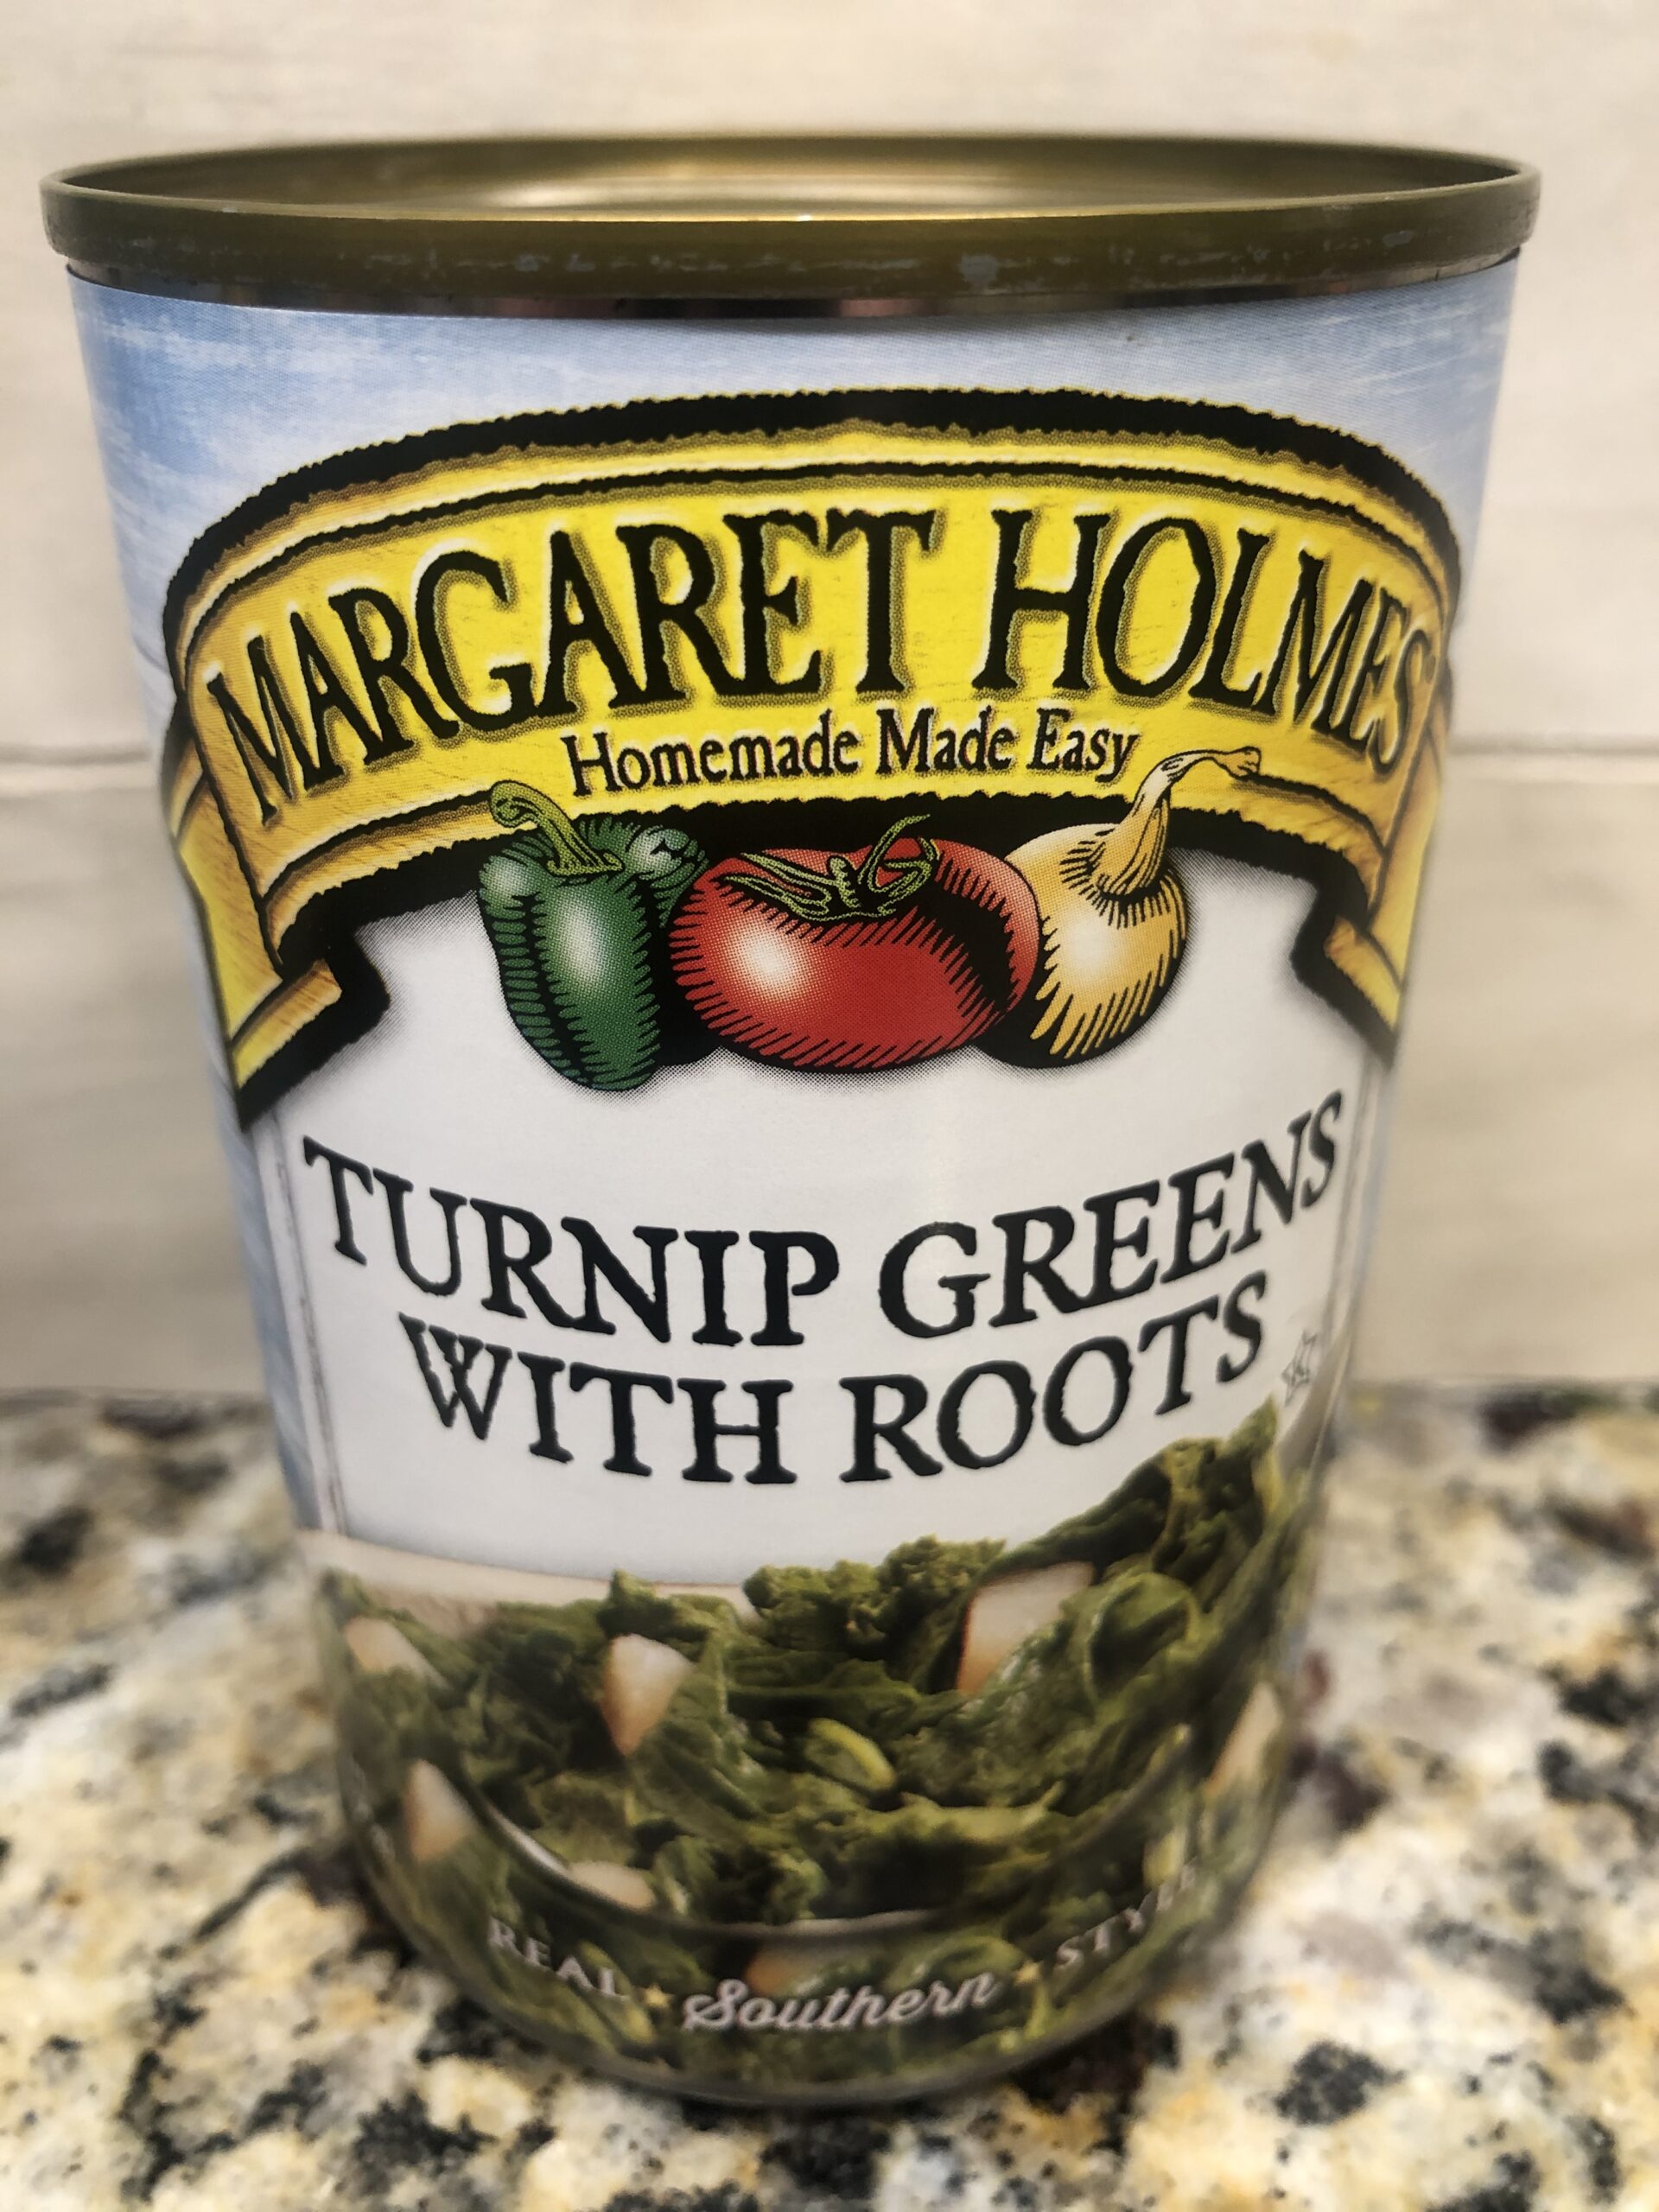 6 CANS Margaret Holmes Southern Style Turnip Greens & Roots 15 oz Can ...